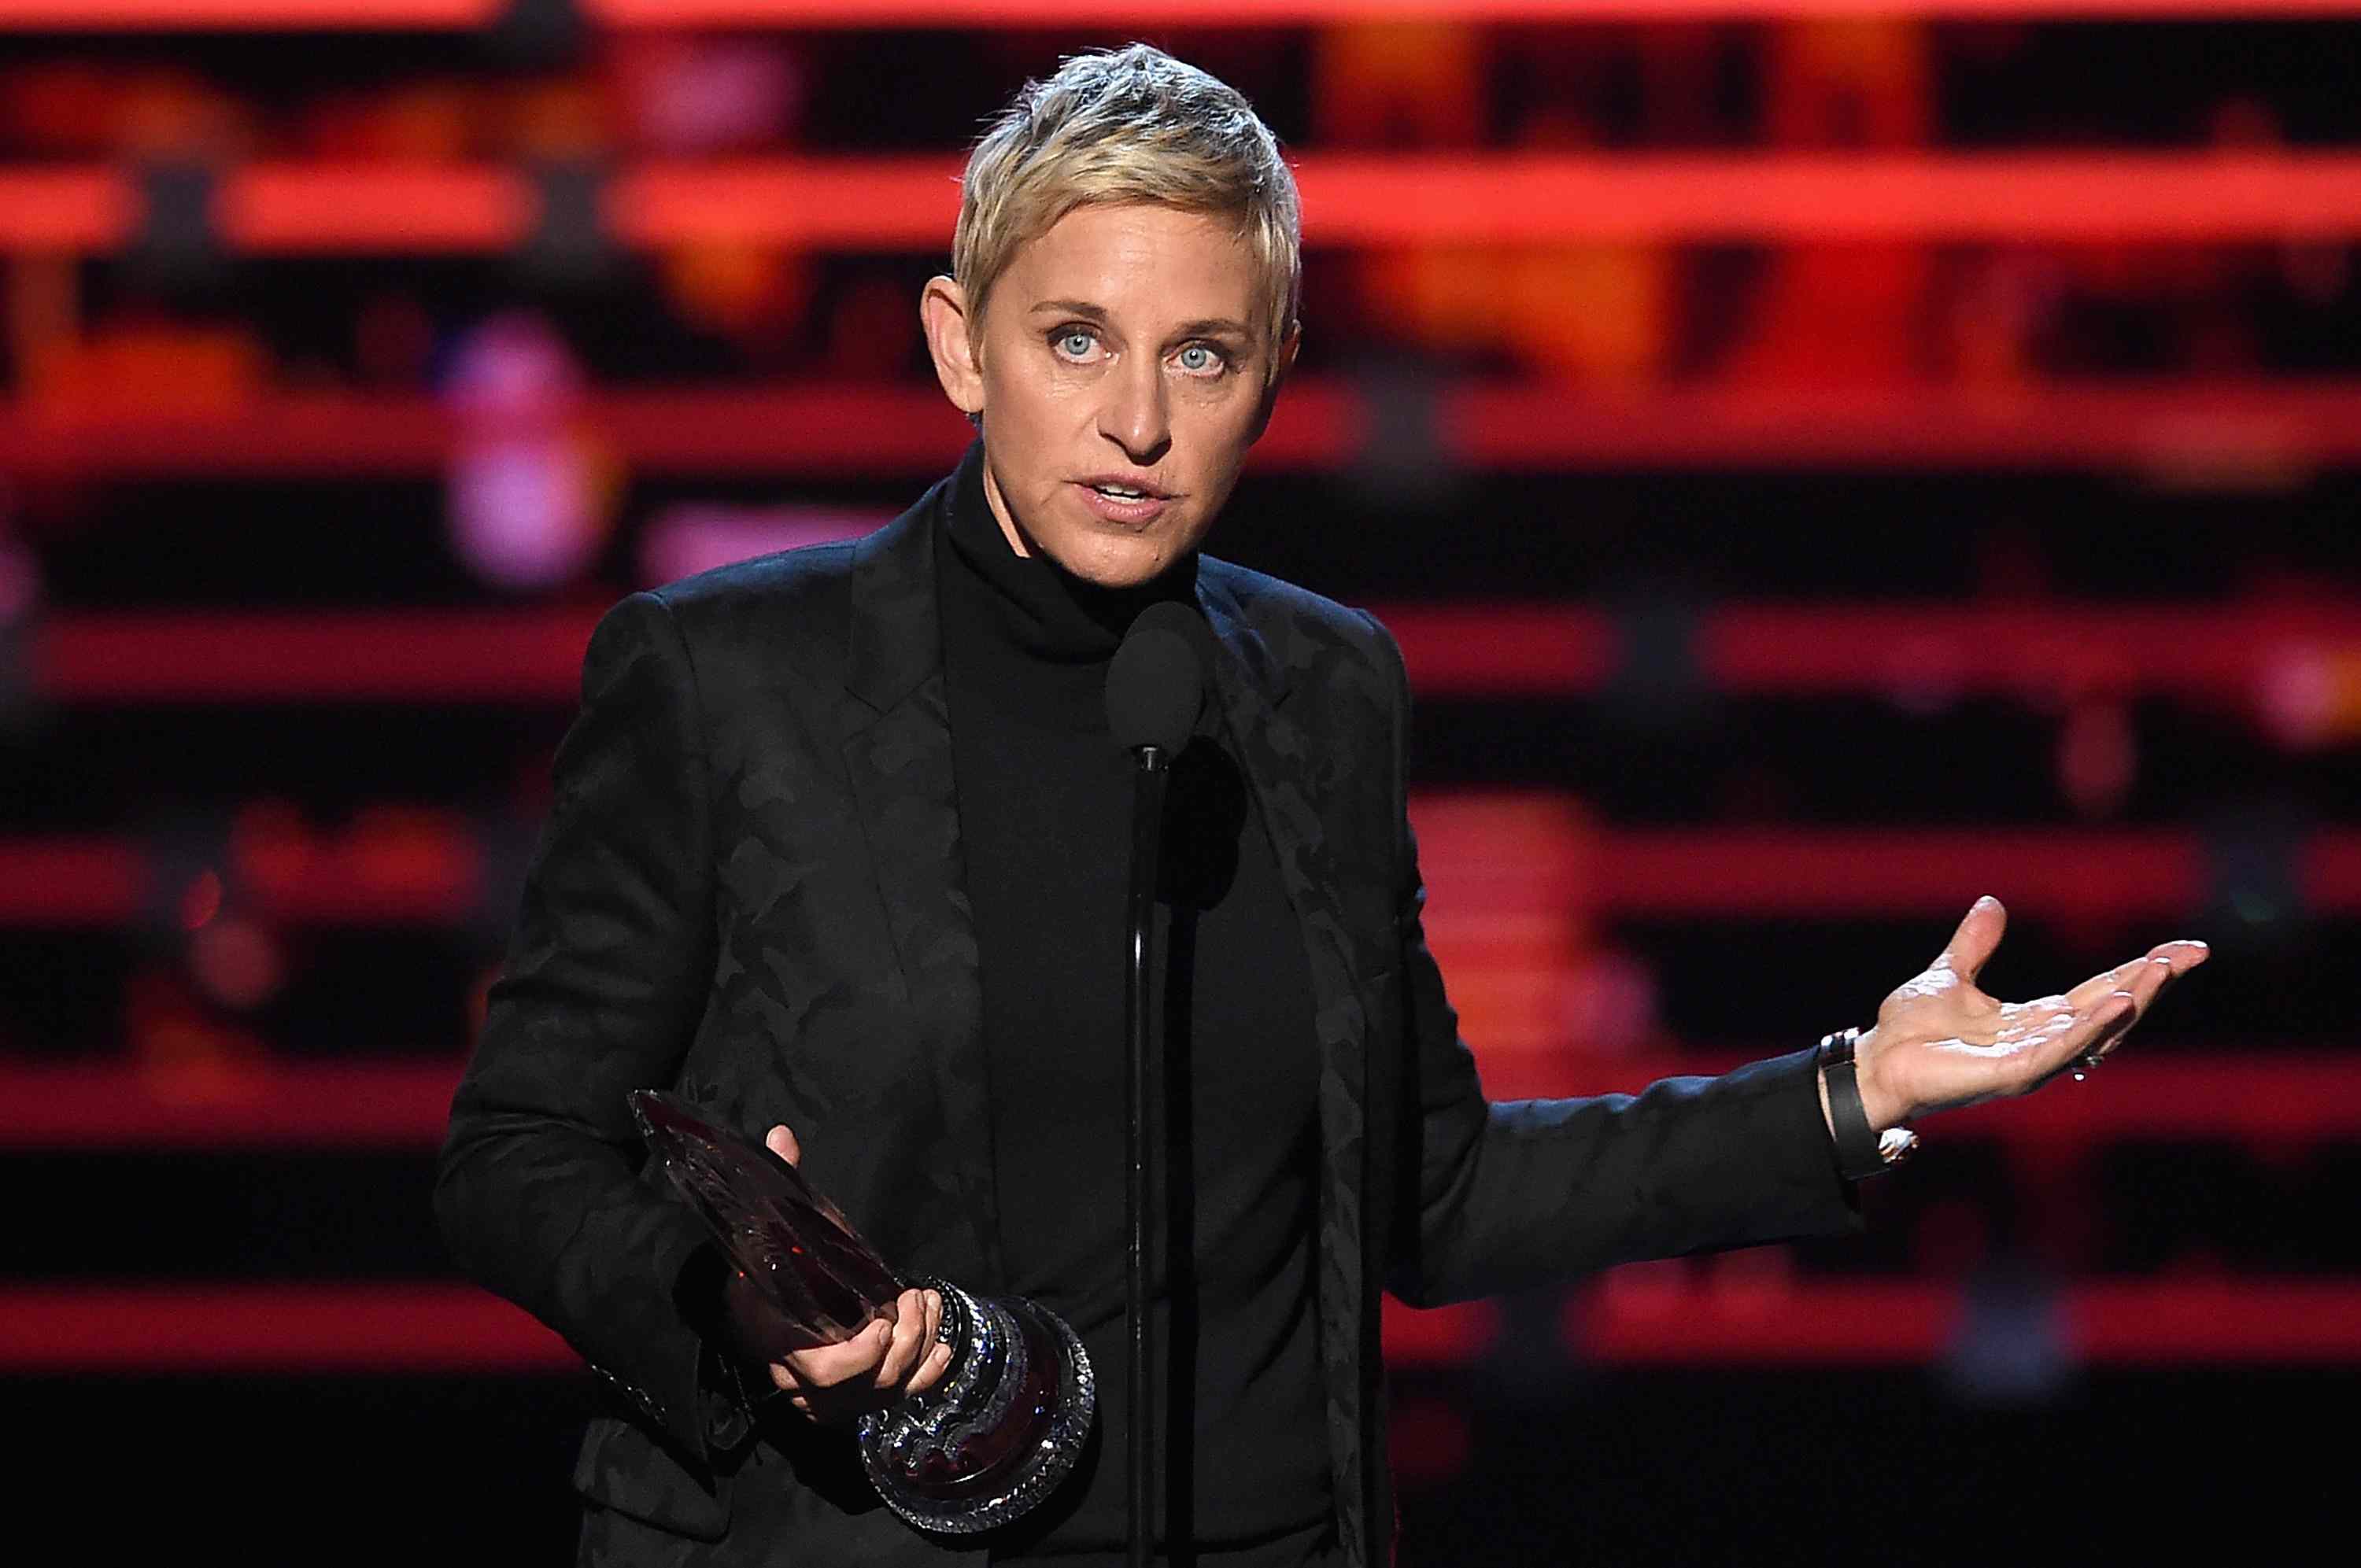 Ellen DeGeneres Jokes About Getting 'Kicked Out of Show Business' After Toxic Workplace Claims: I 'Had a Hard Time'